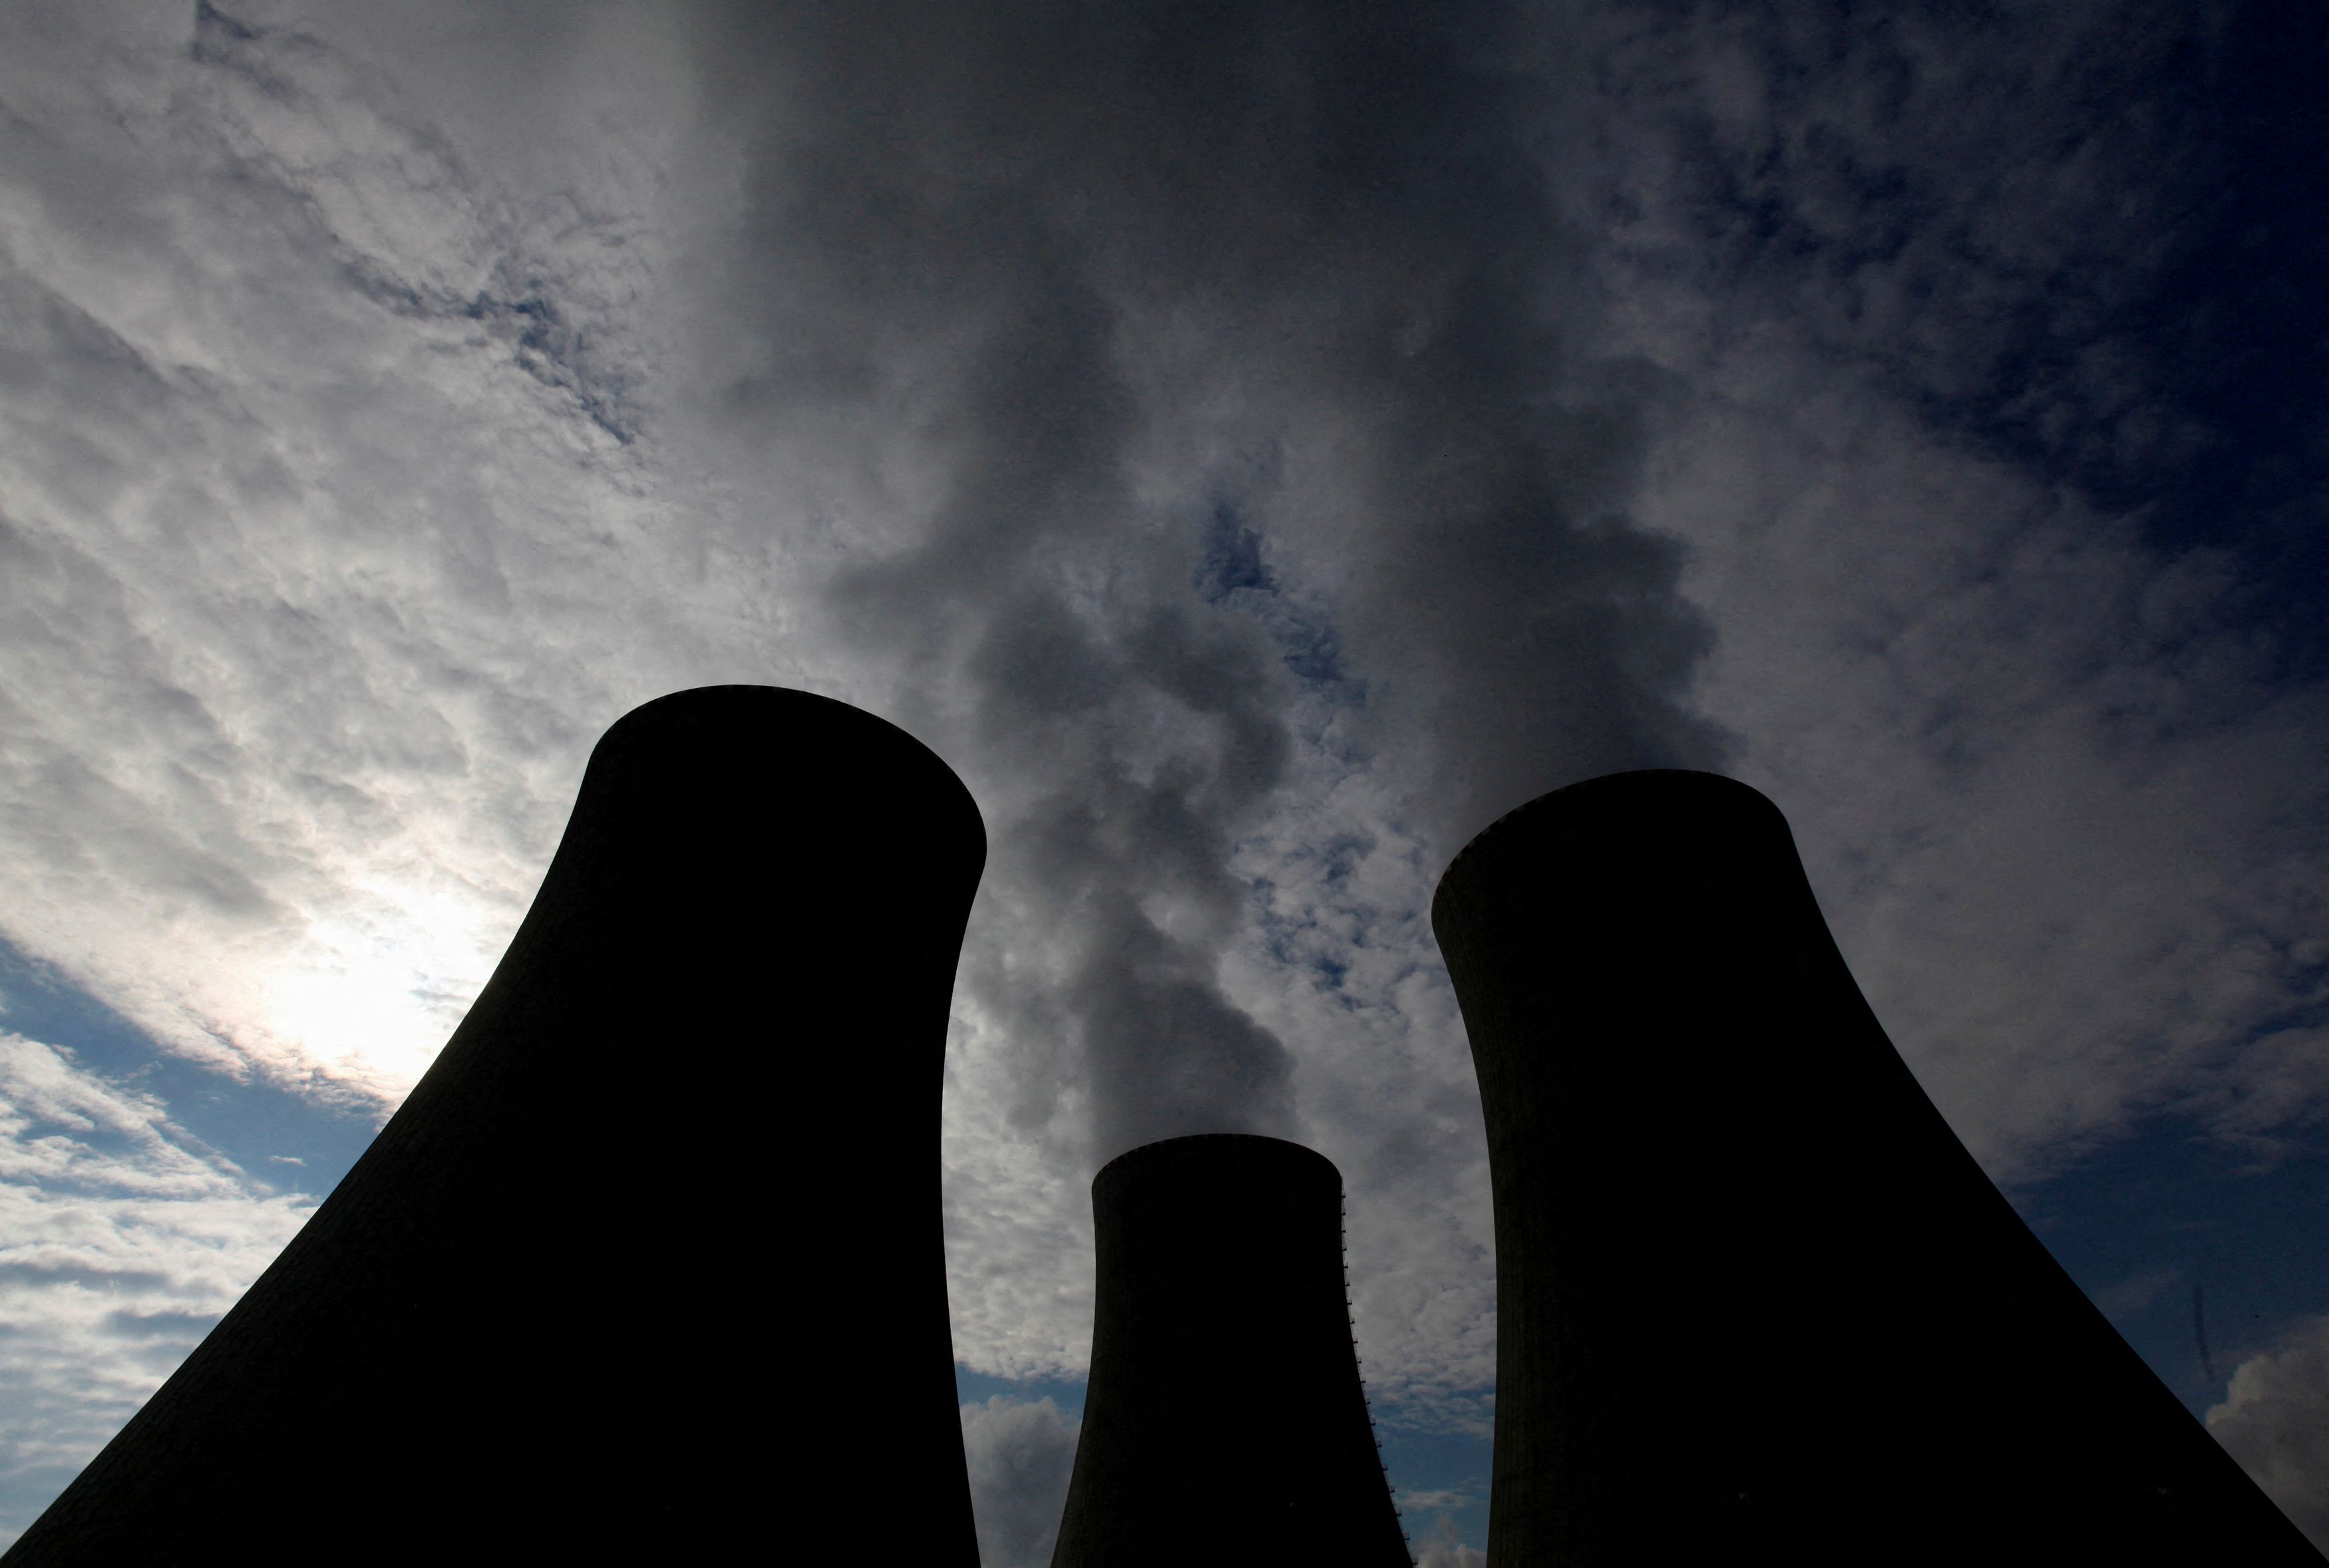 Steam billows from the cooling towers of the Temelin nuclear power plant near the South Bohemian town of Tyn nad Vltavou